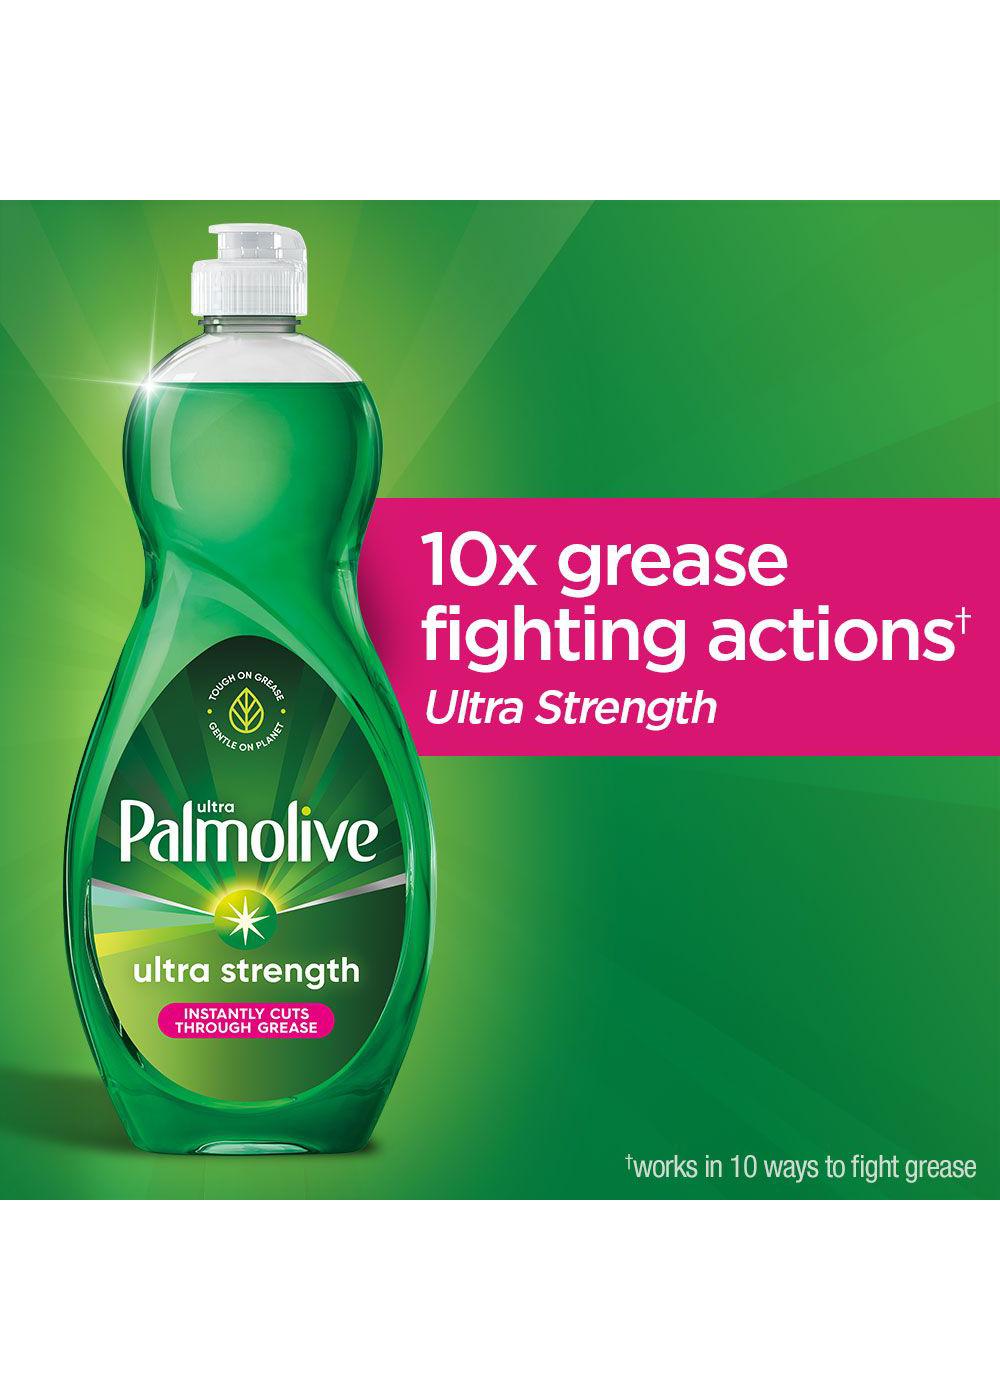 Palmolive Ultra Strength Dish Soap; image 5 of 7